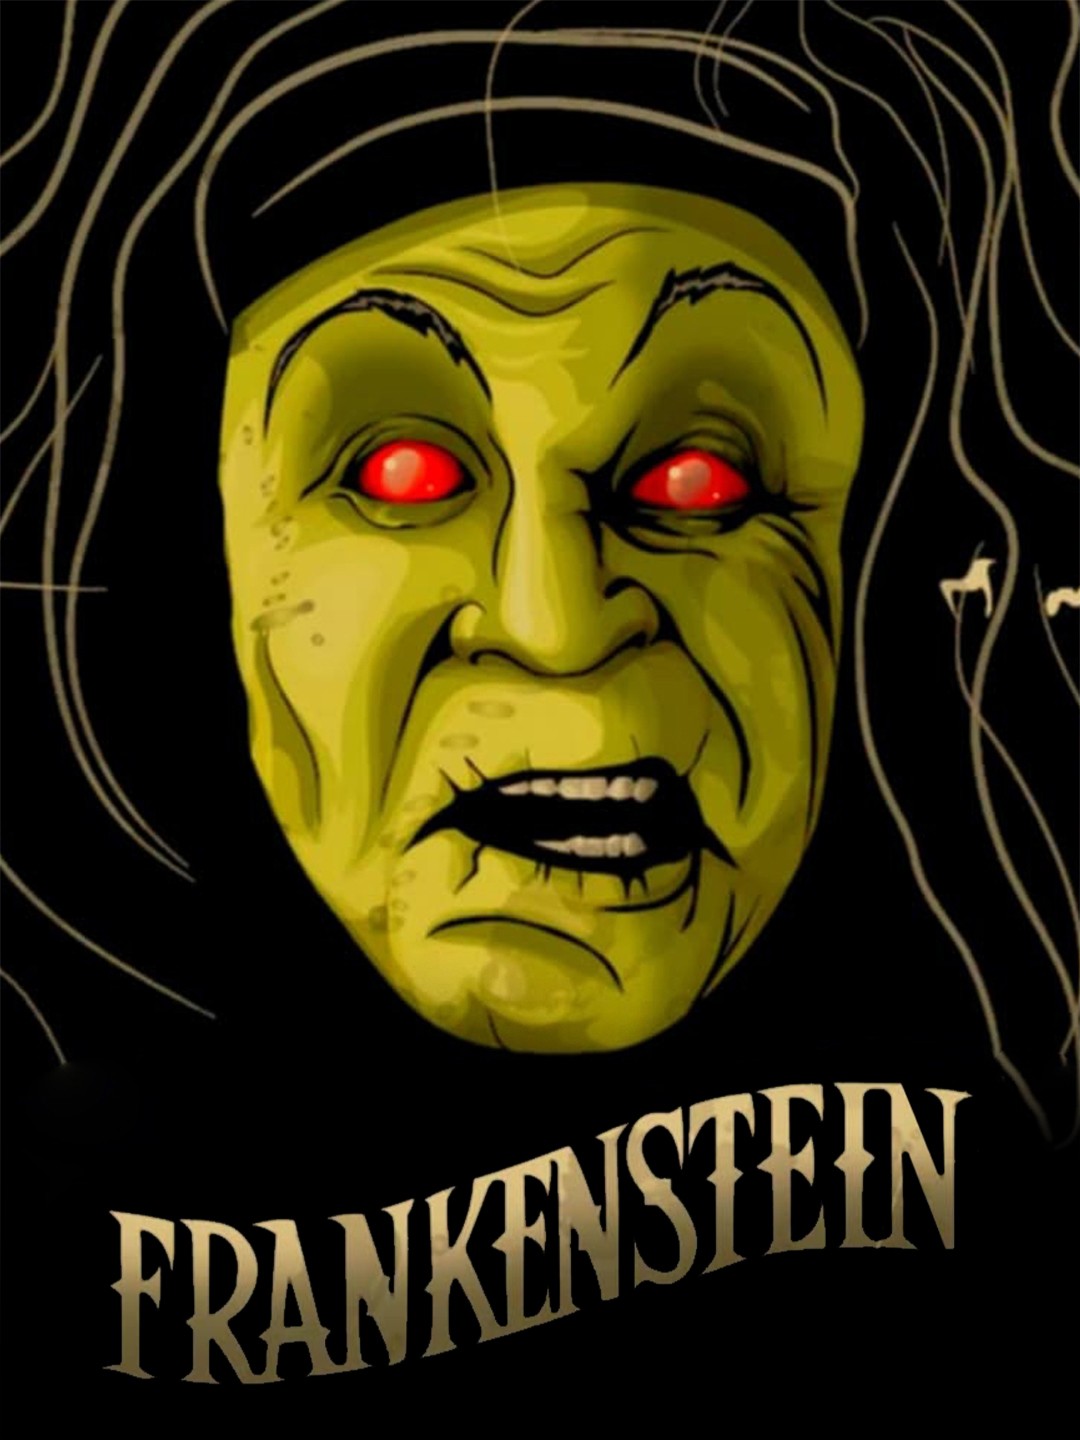 Young Frankenstein - Rotten Tomatoes